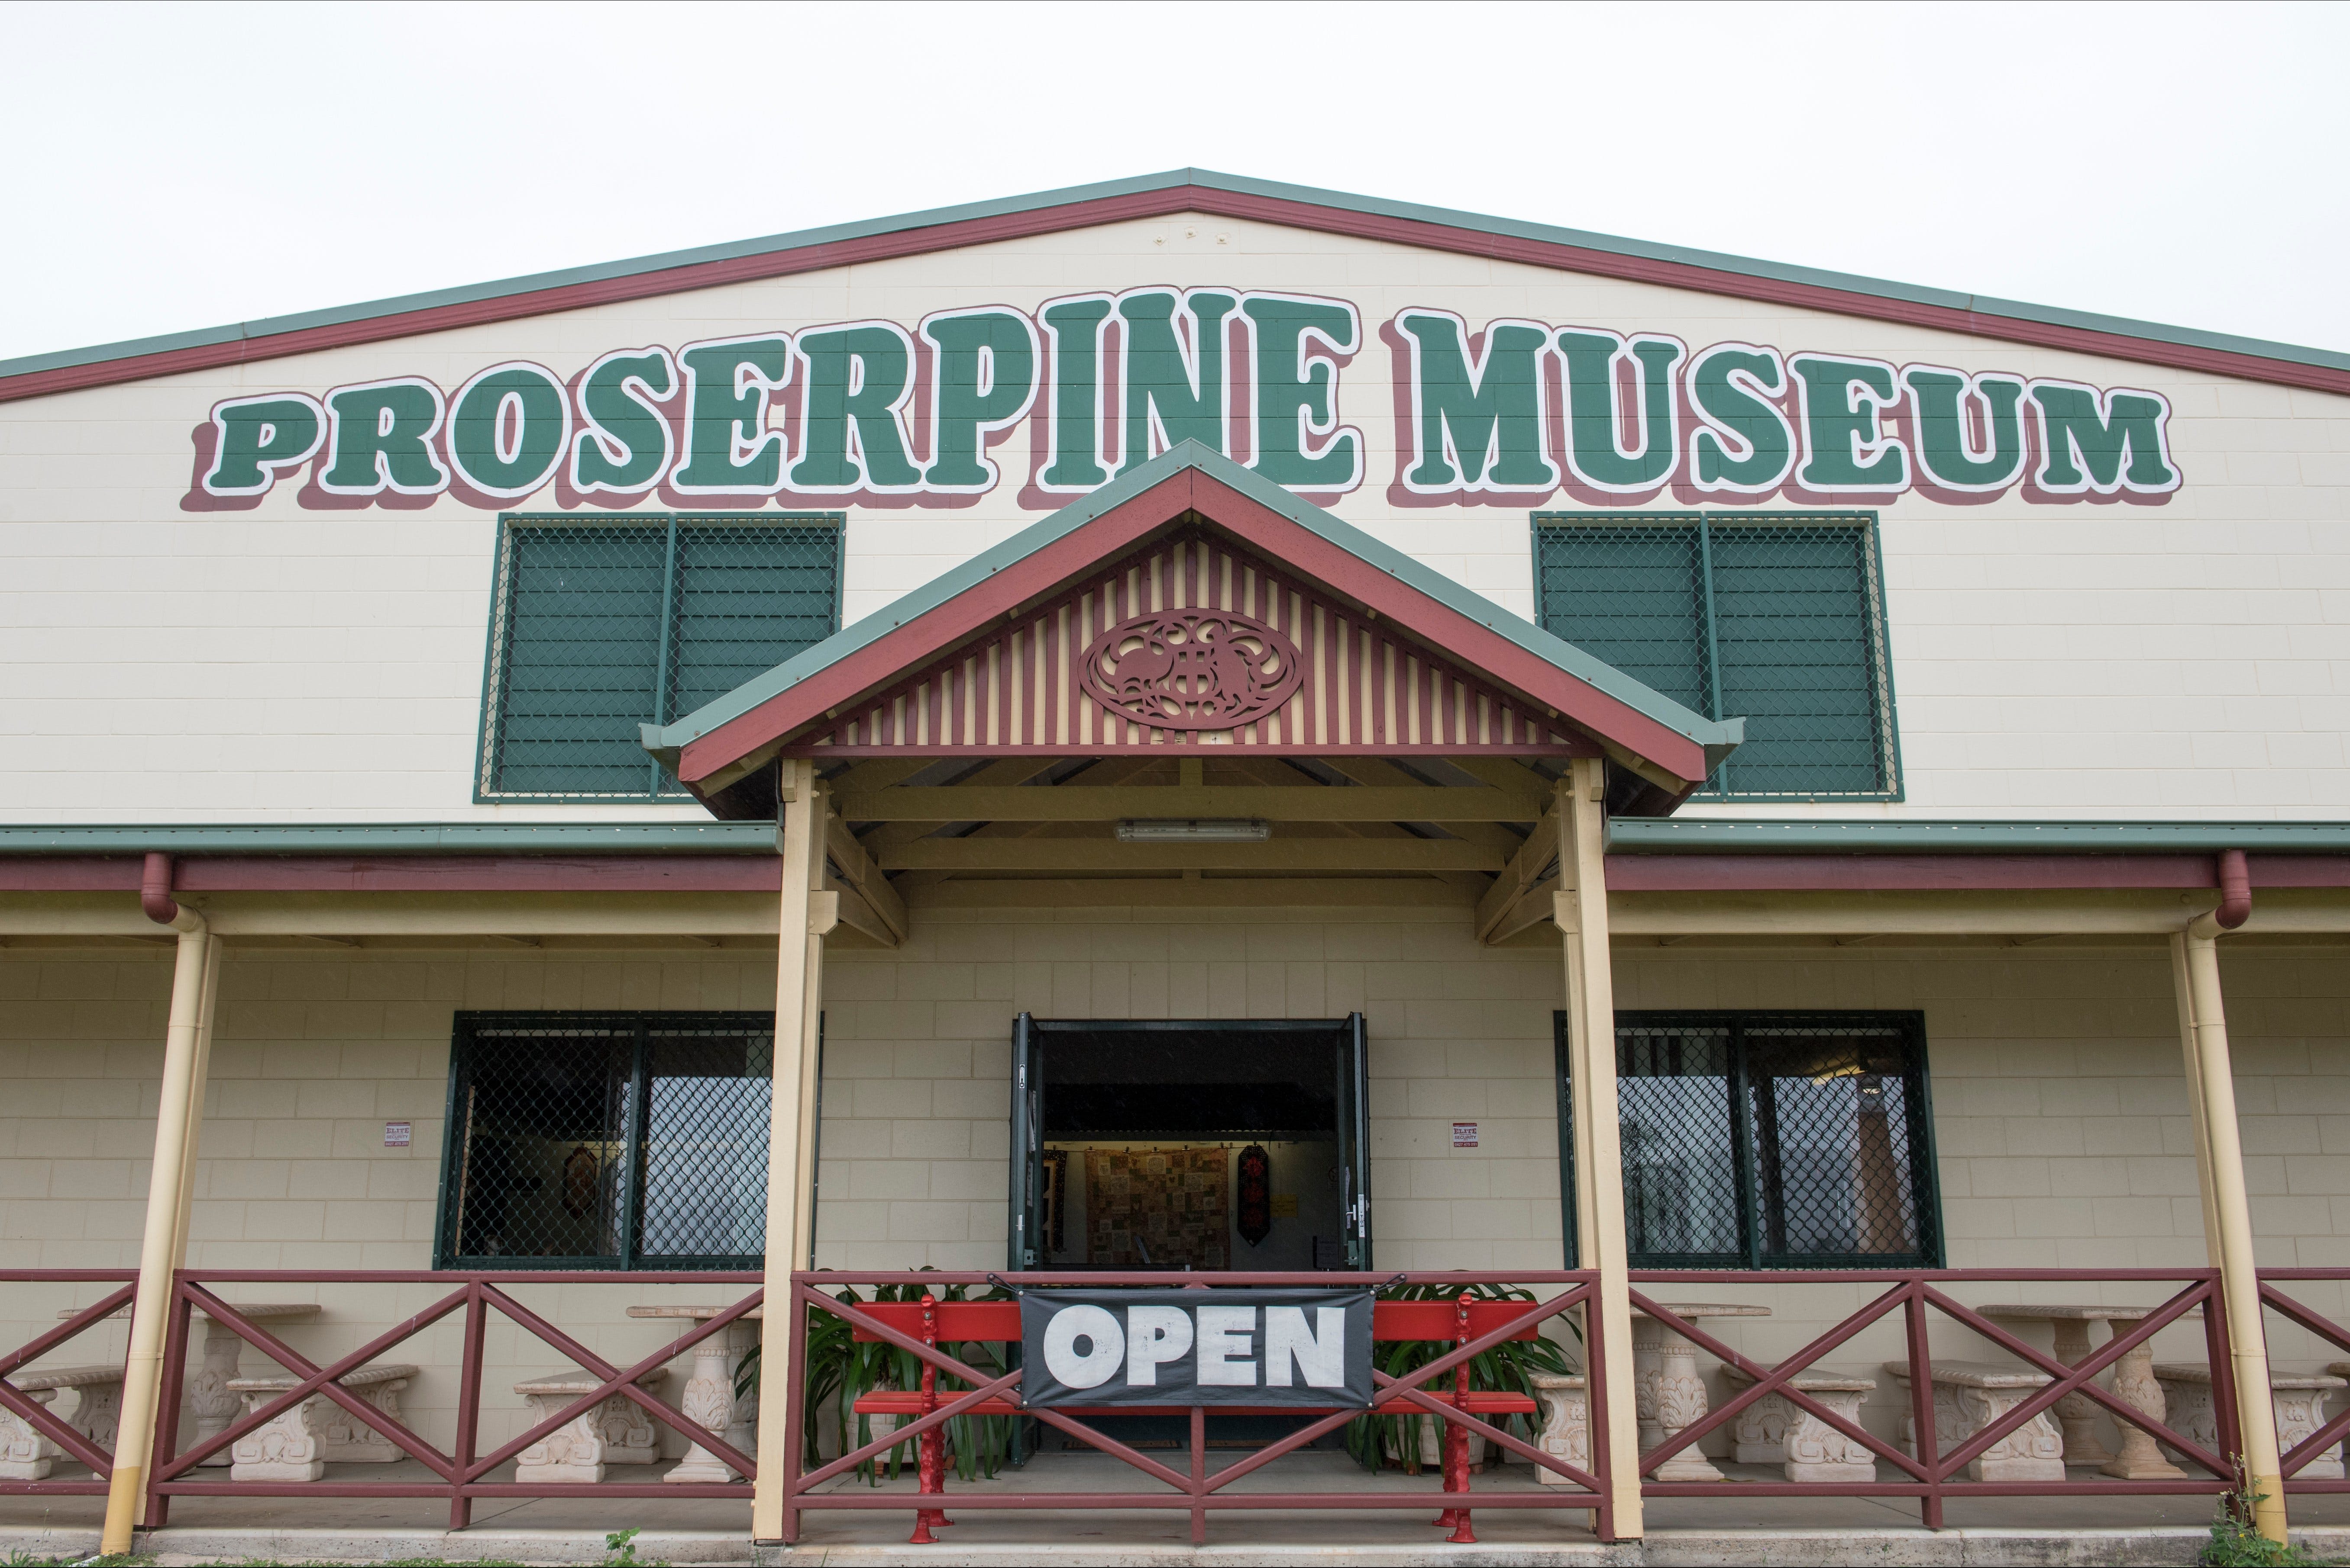 Proserpine Historical Museum Logo and Images